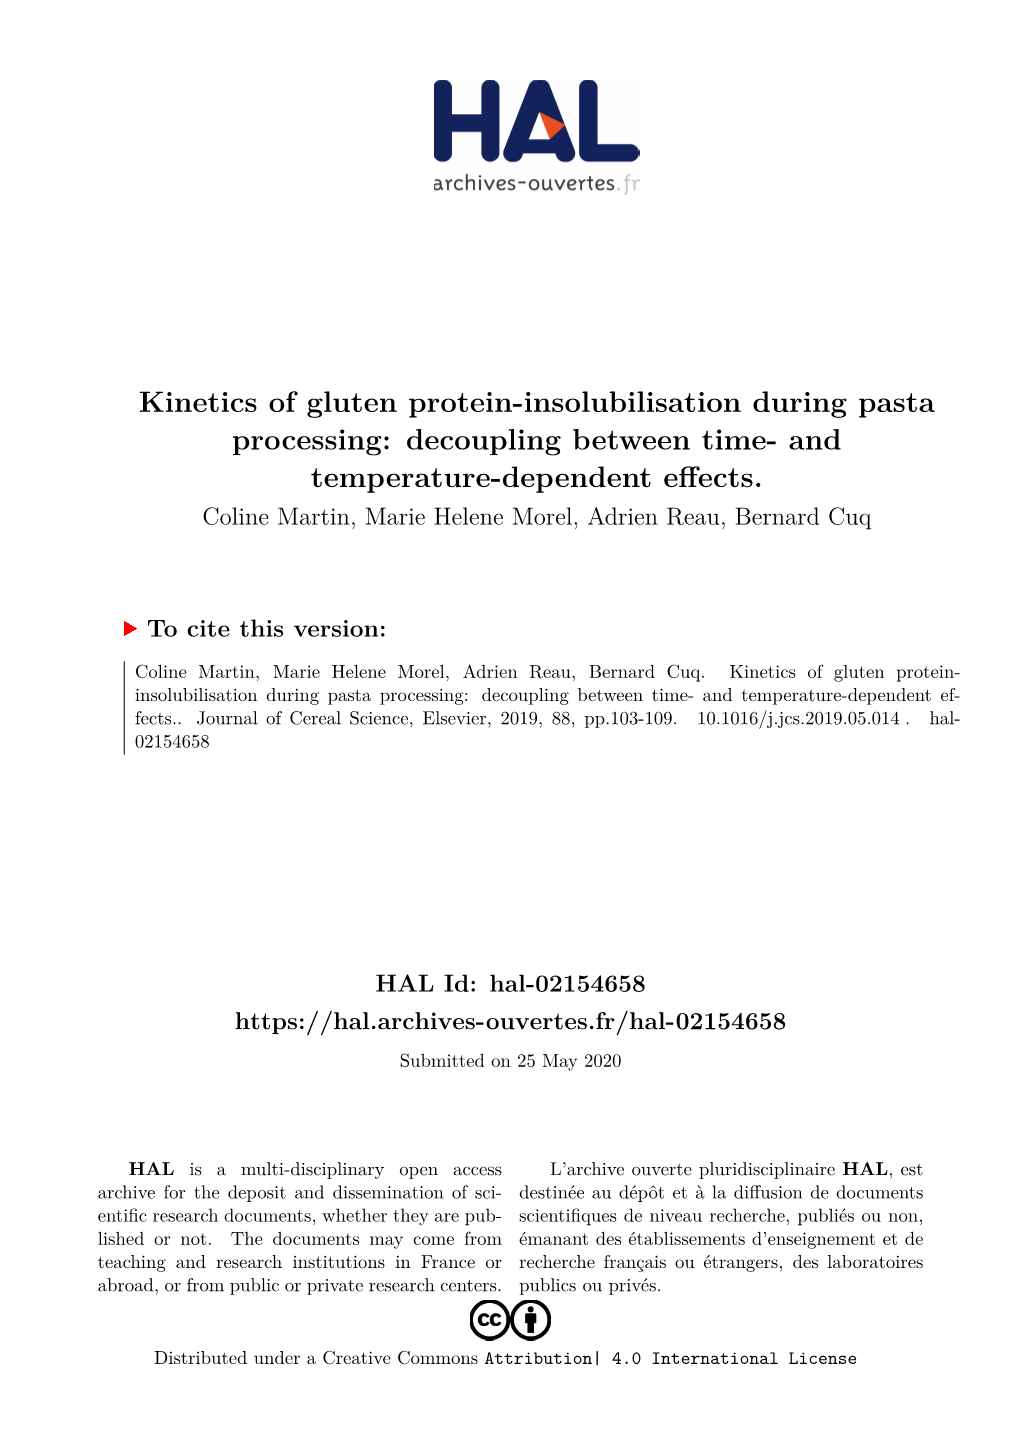 Kinetics of Gluten Protein-Insolubilisation During Pasta Processing: Decoupling Between Time- and Temperature-Dependent Effects